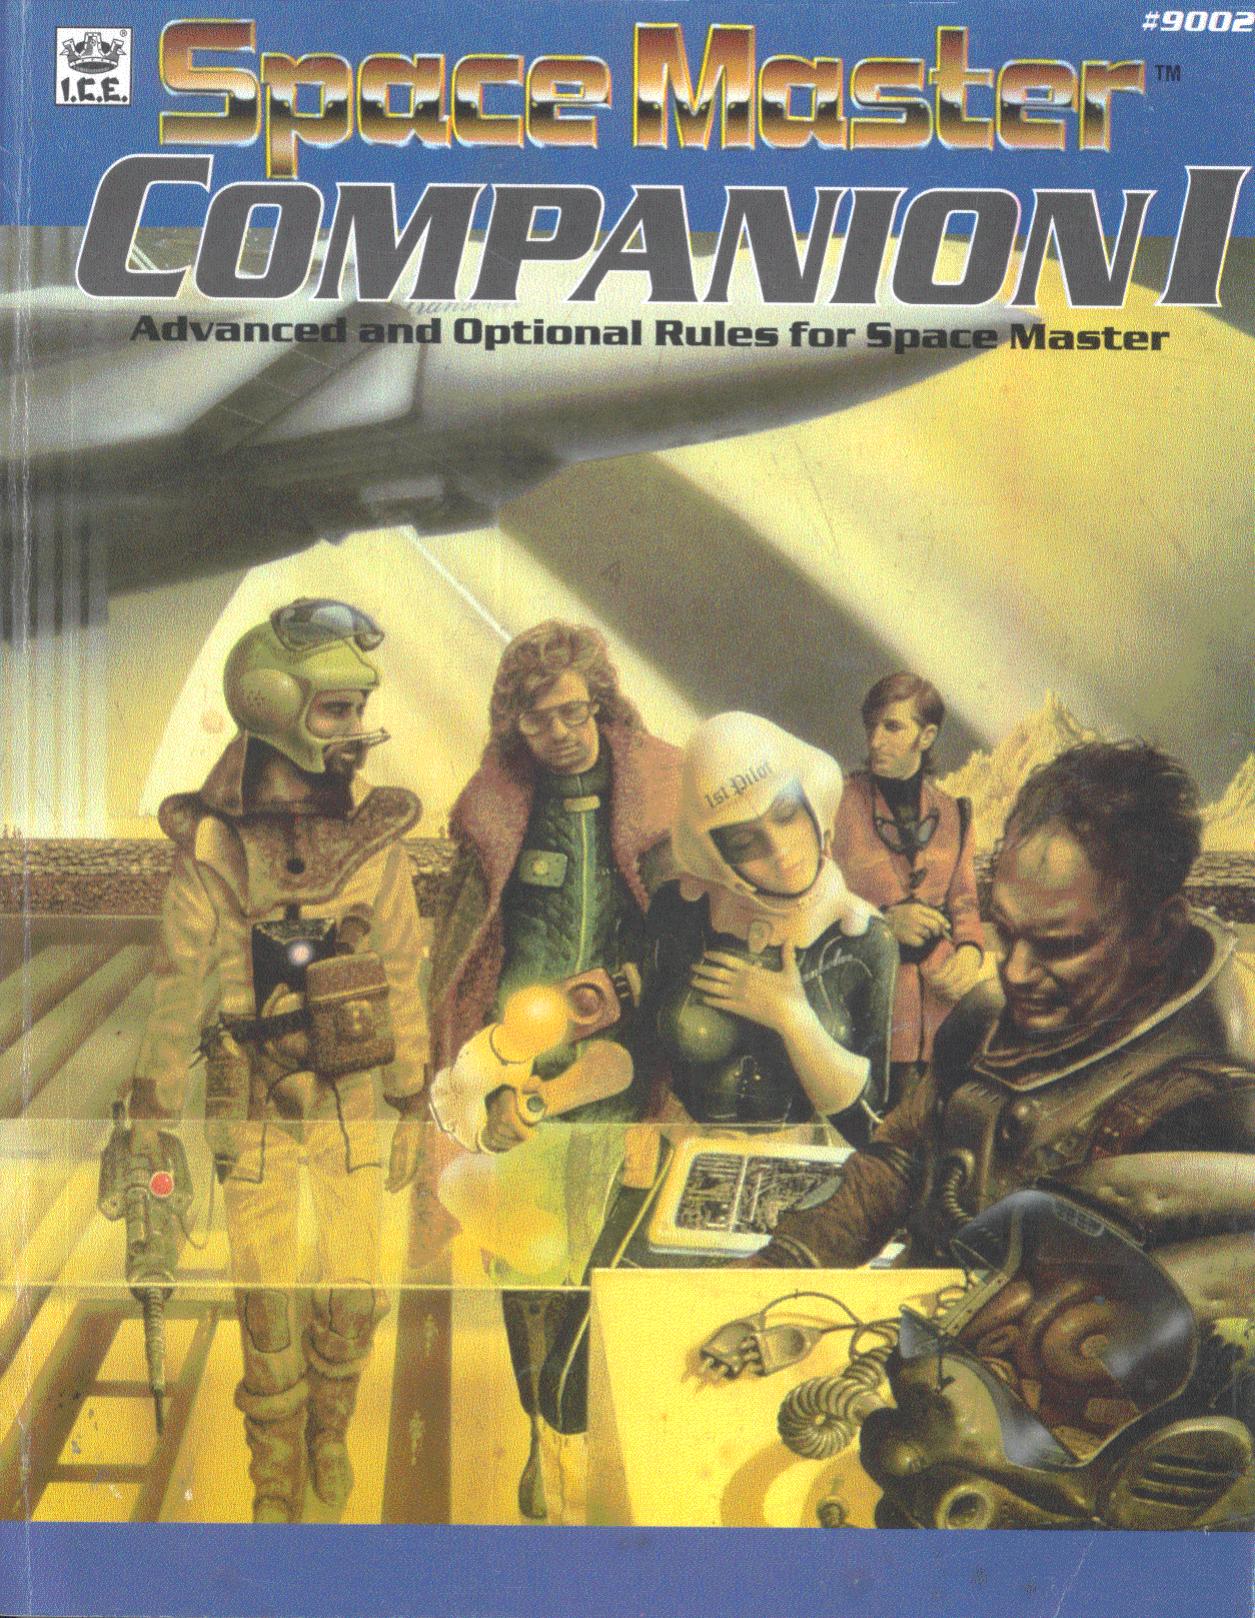 9002 Spacemaster Companion I (2nd Edition)